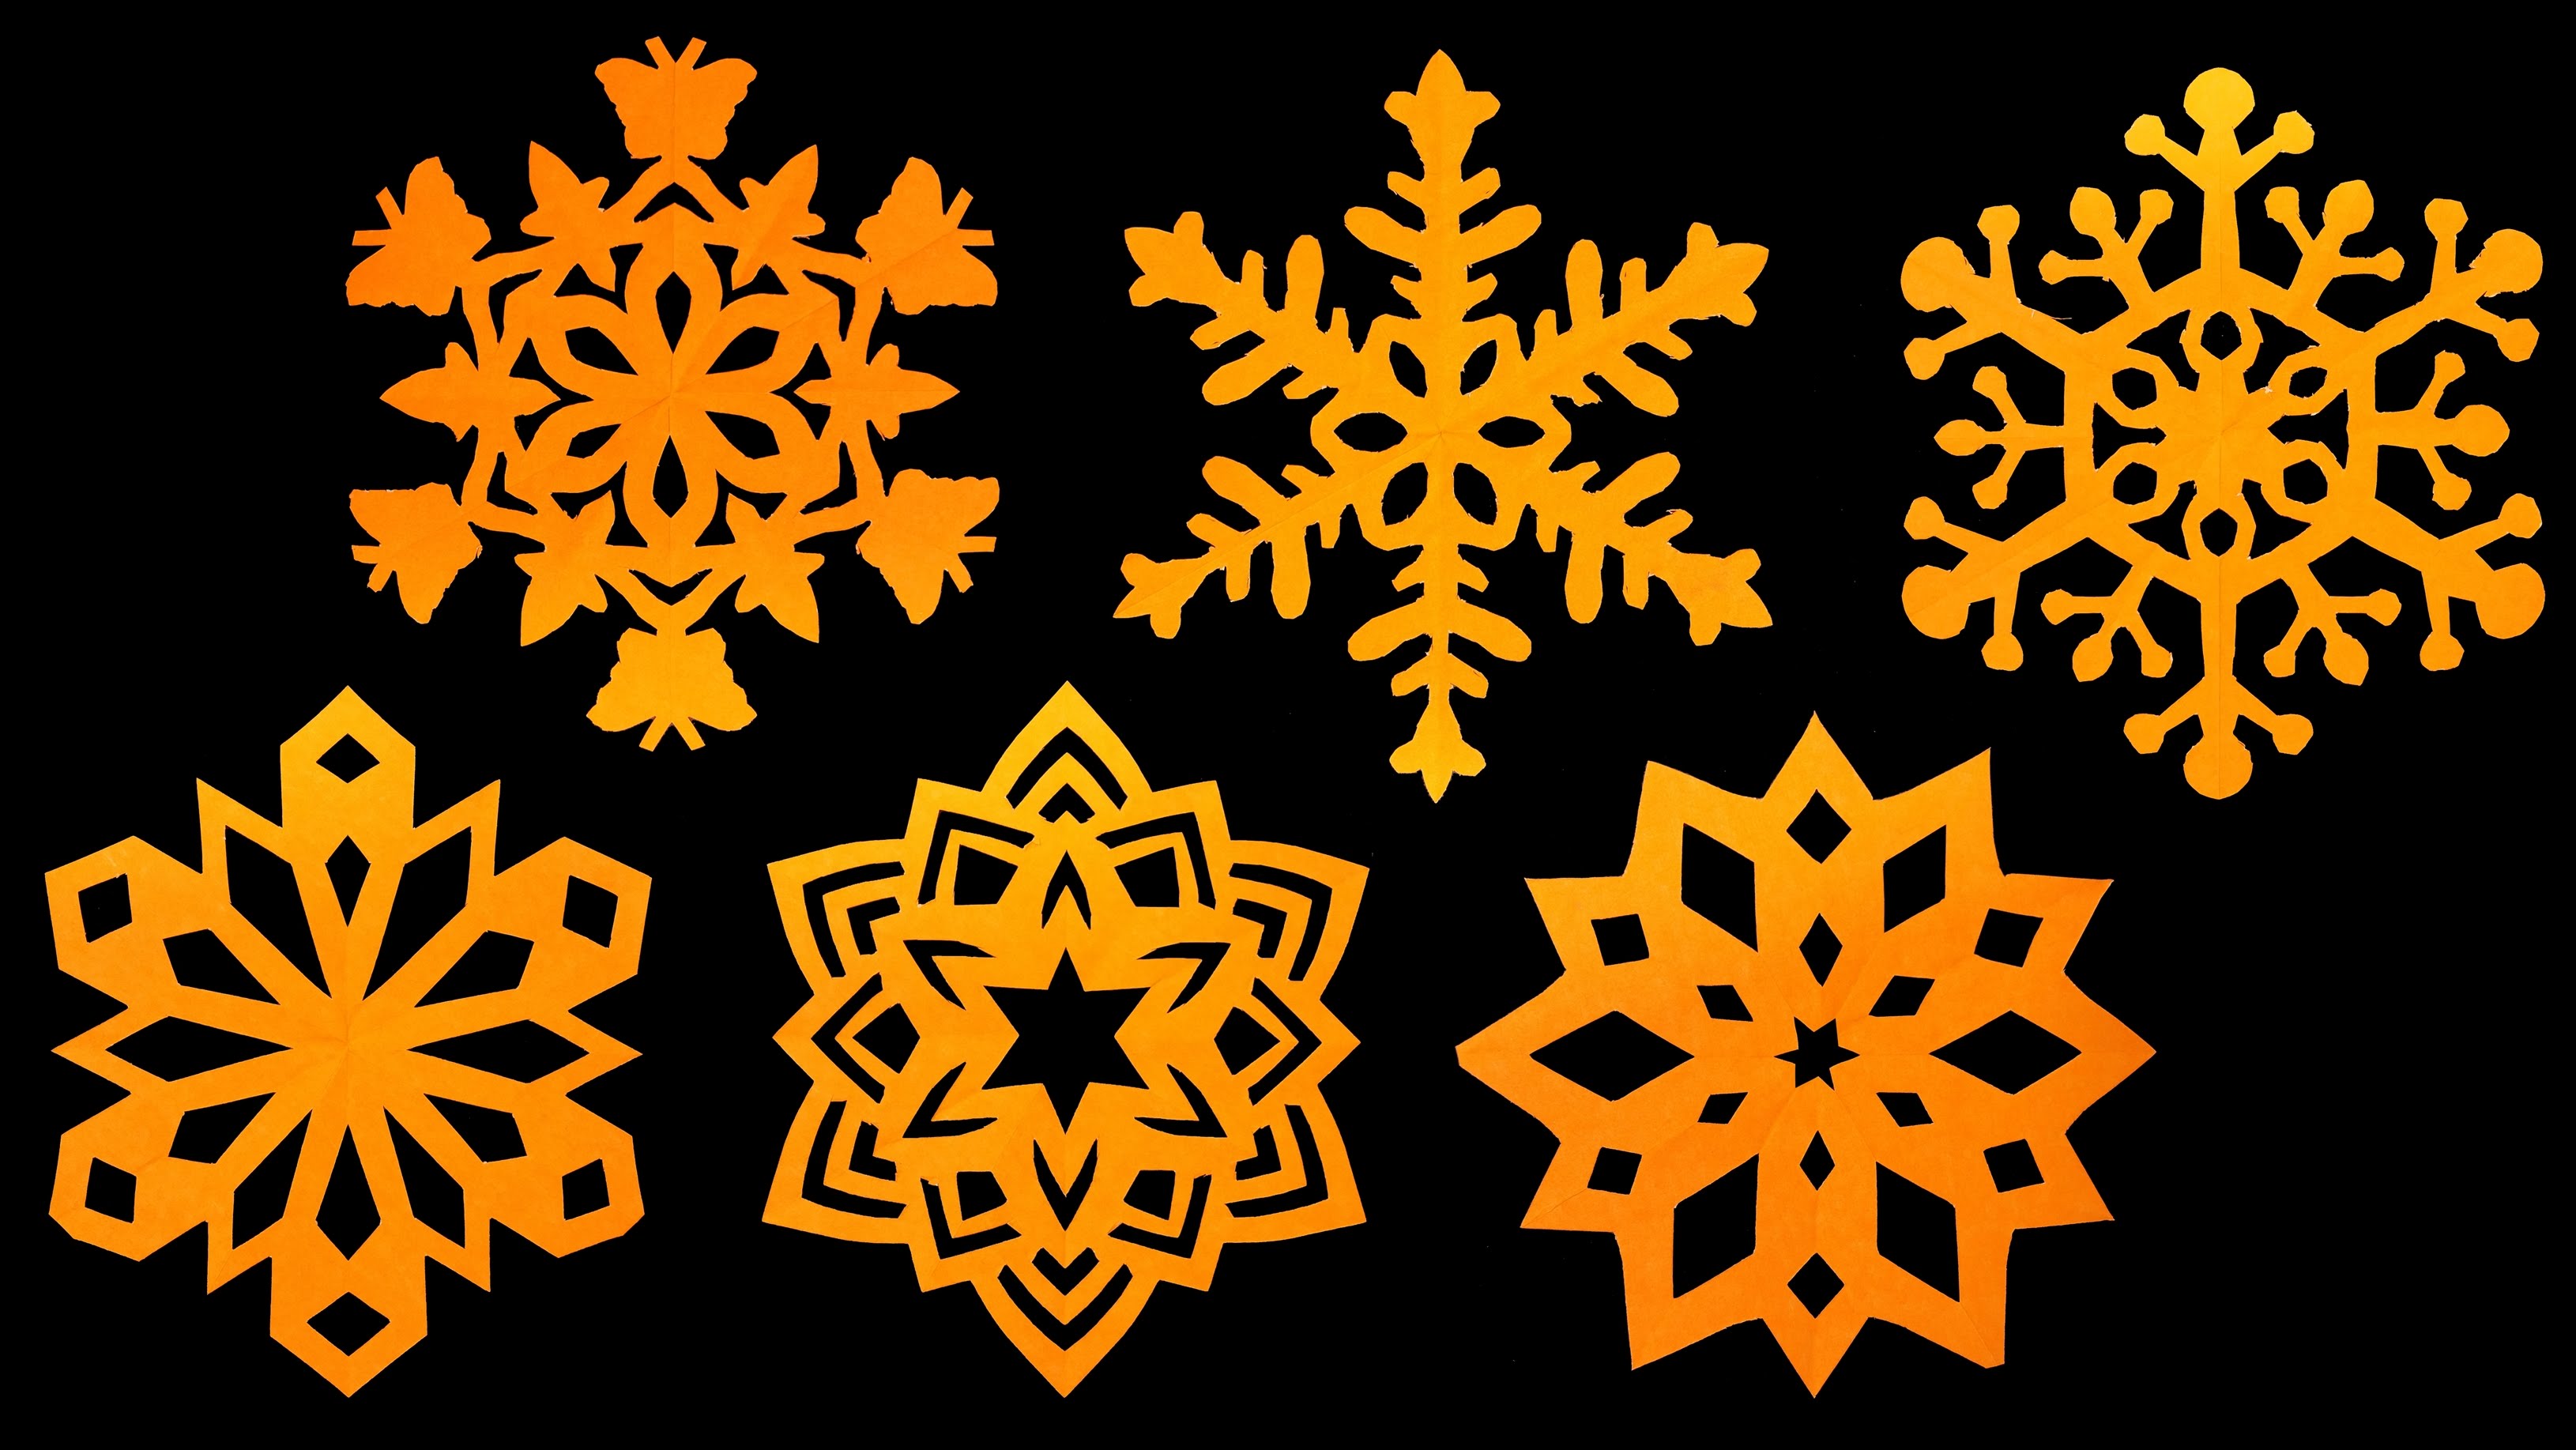 How to make paper Snowflakes - Step by step tutorial (Very easy ...